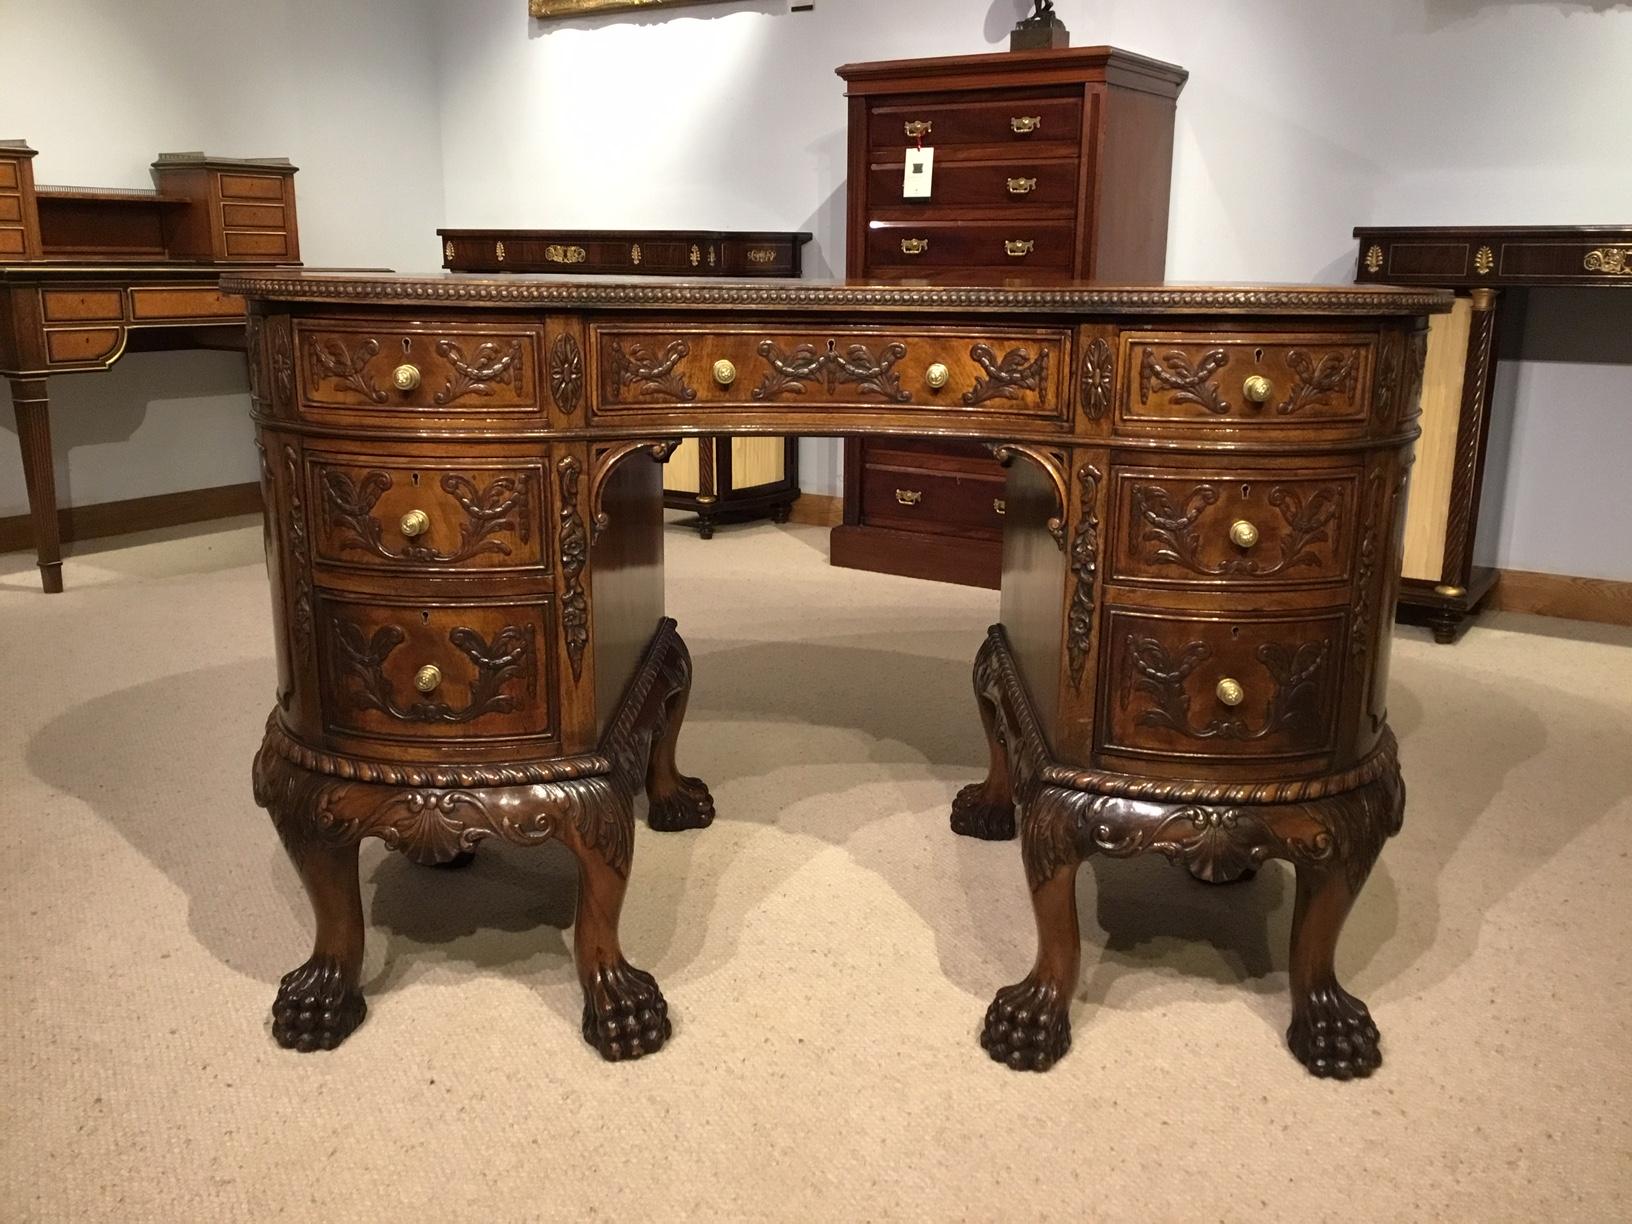 A mahogany Chippendale Revival kidney shaped writing desk. Having a kidney shaped top with the original faded tan leather writing surface with flame mahogany banding. The front has an arrangement of seven mahogany lined drawers with finely carved